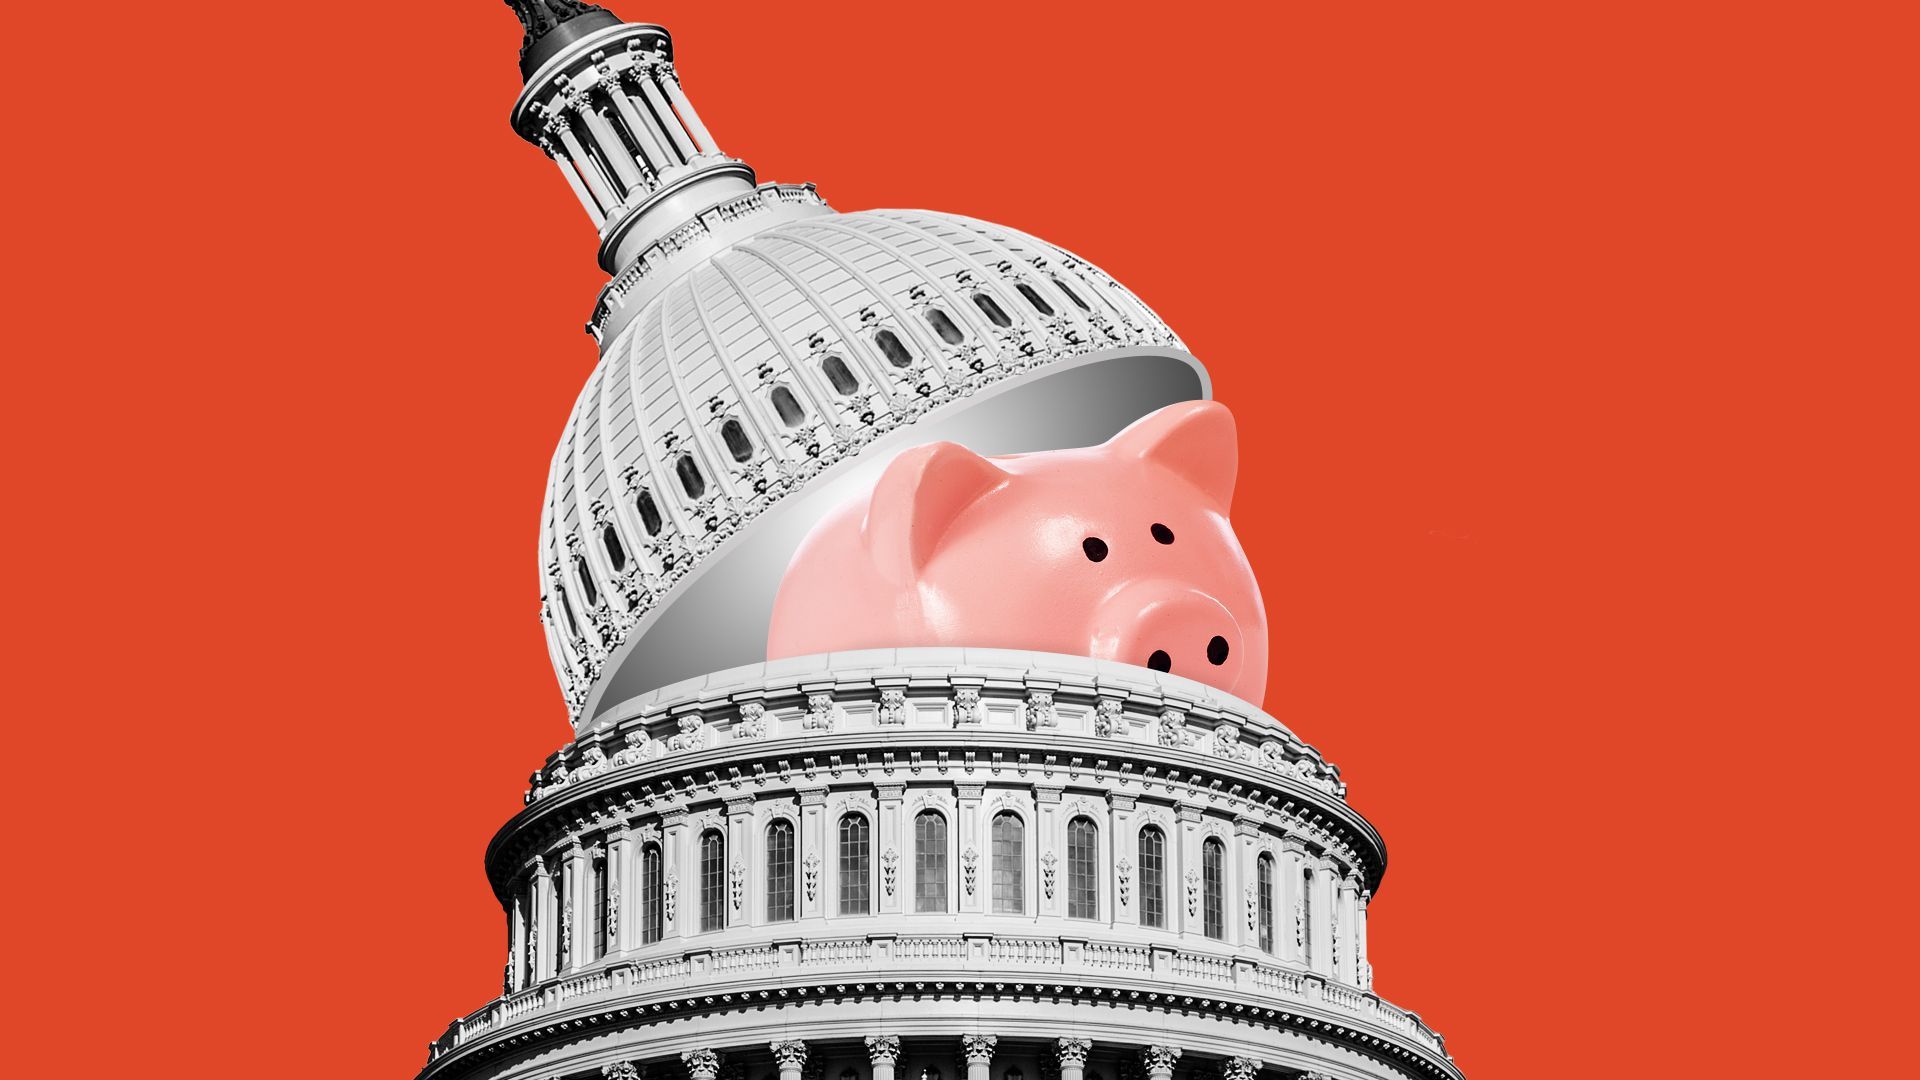 Illustration of the capitol dome cracking open to show a piggy bank inside